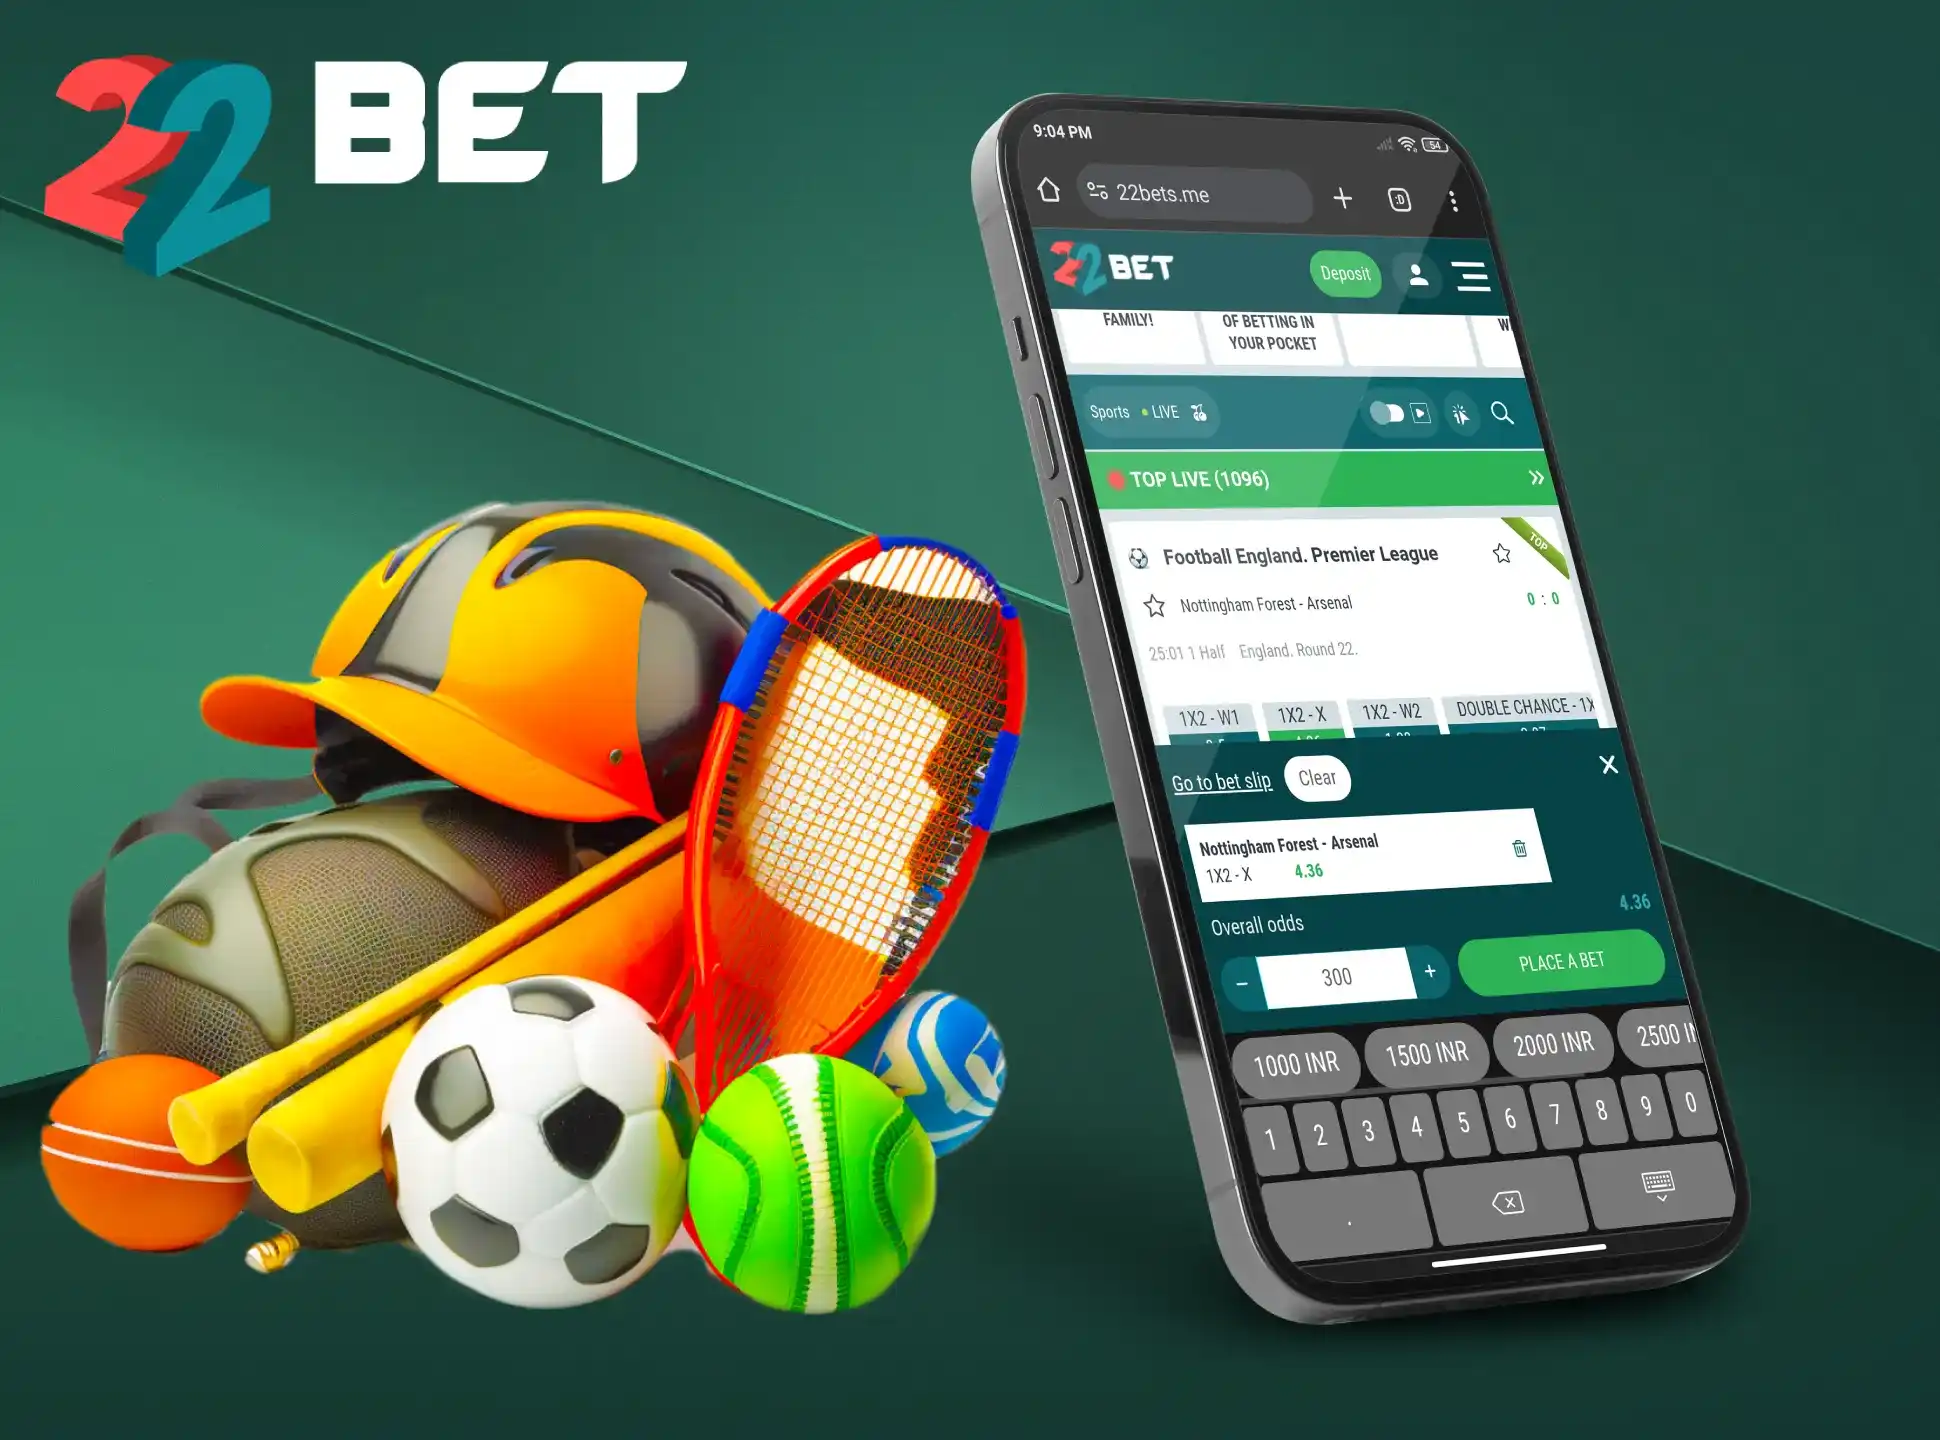 Making a bet in the 22Bet app can be done in a few steps.